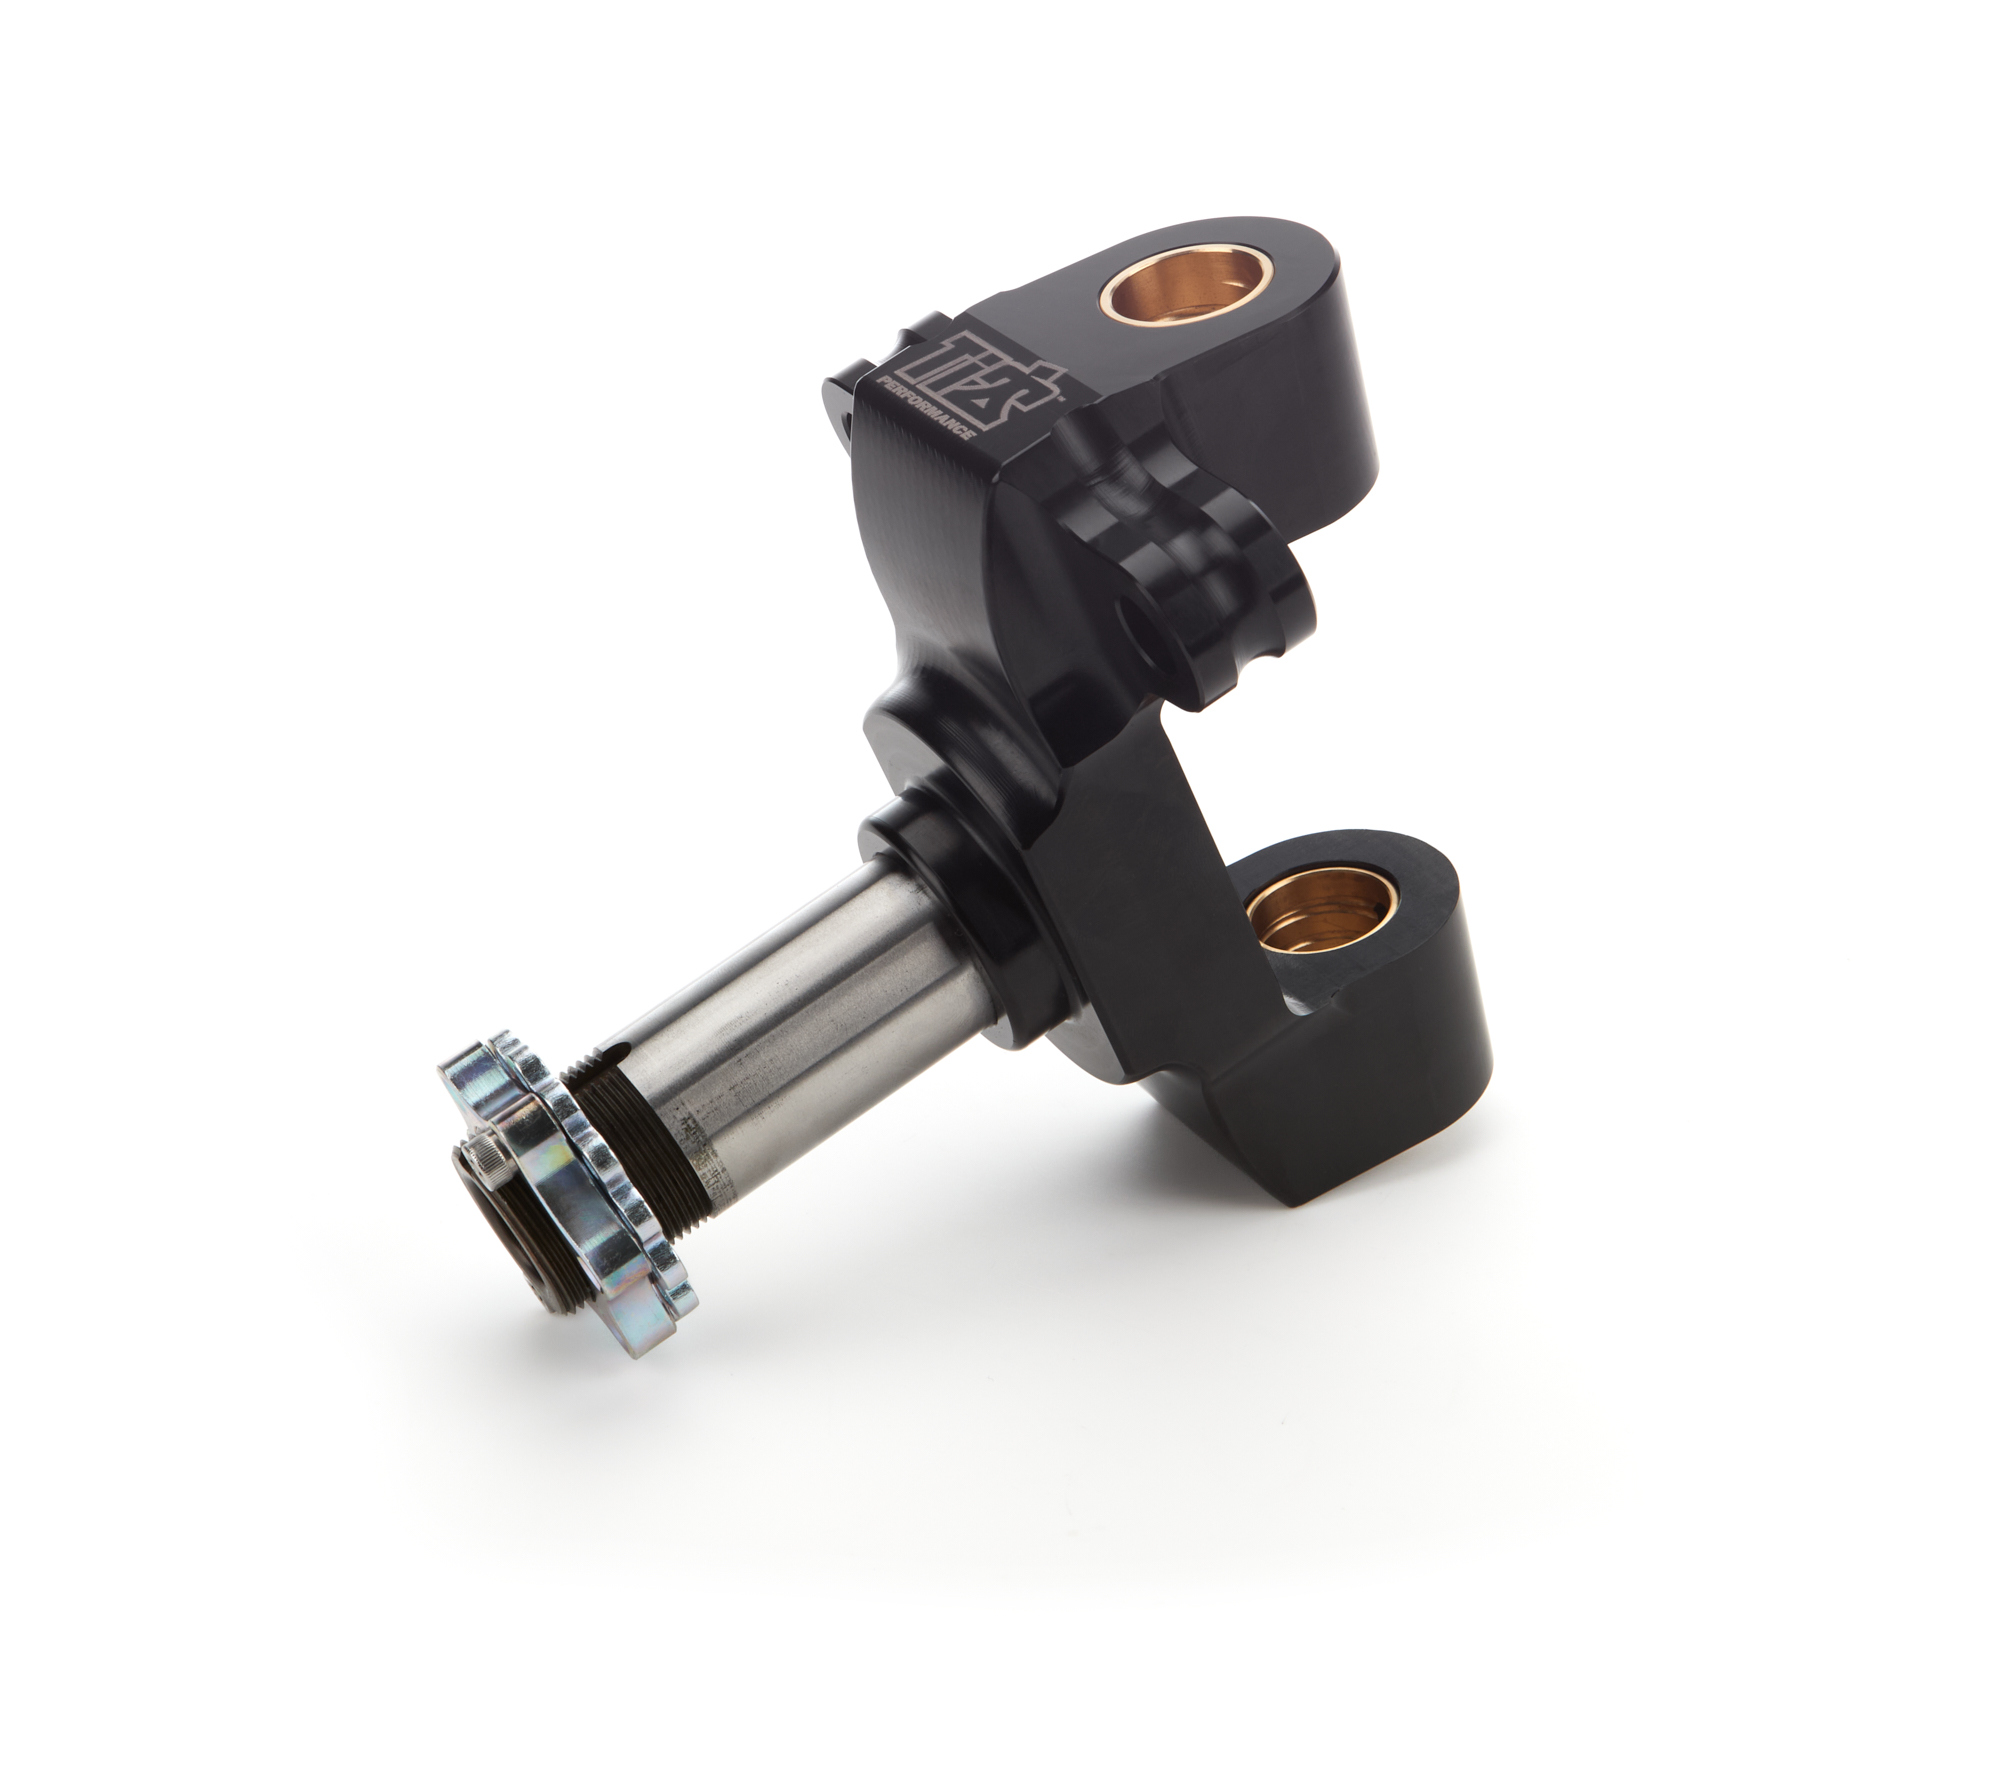 Ti22 Performance 2850 Spindle, Aluminum Body, 9 Degree Steel Snout, Steel Locknut Included, Aluminum / Steel, Black Anodized / Natural, Sprint Car, Each